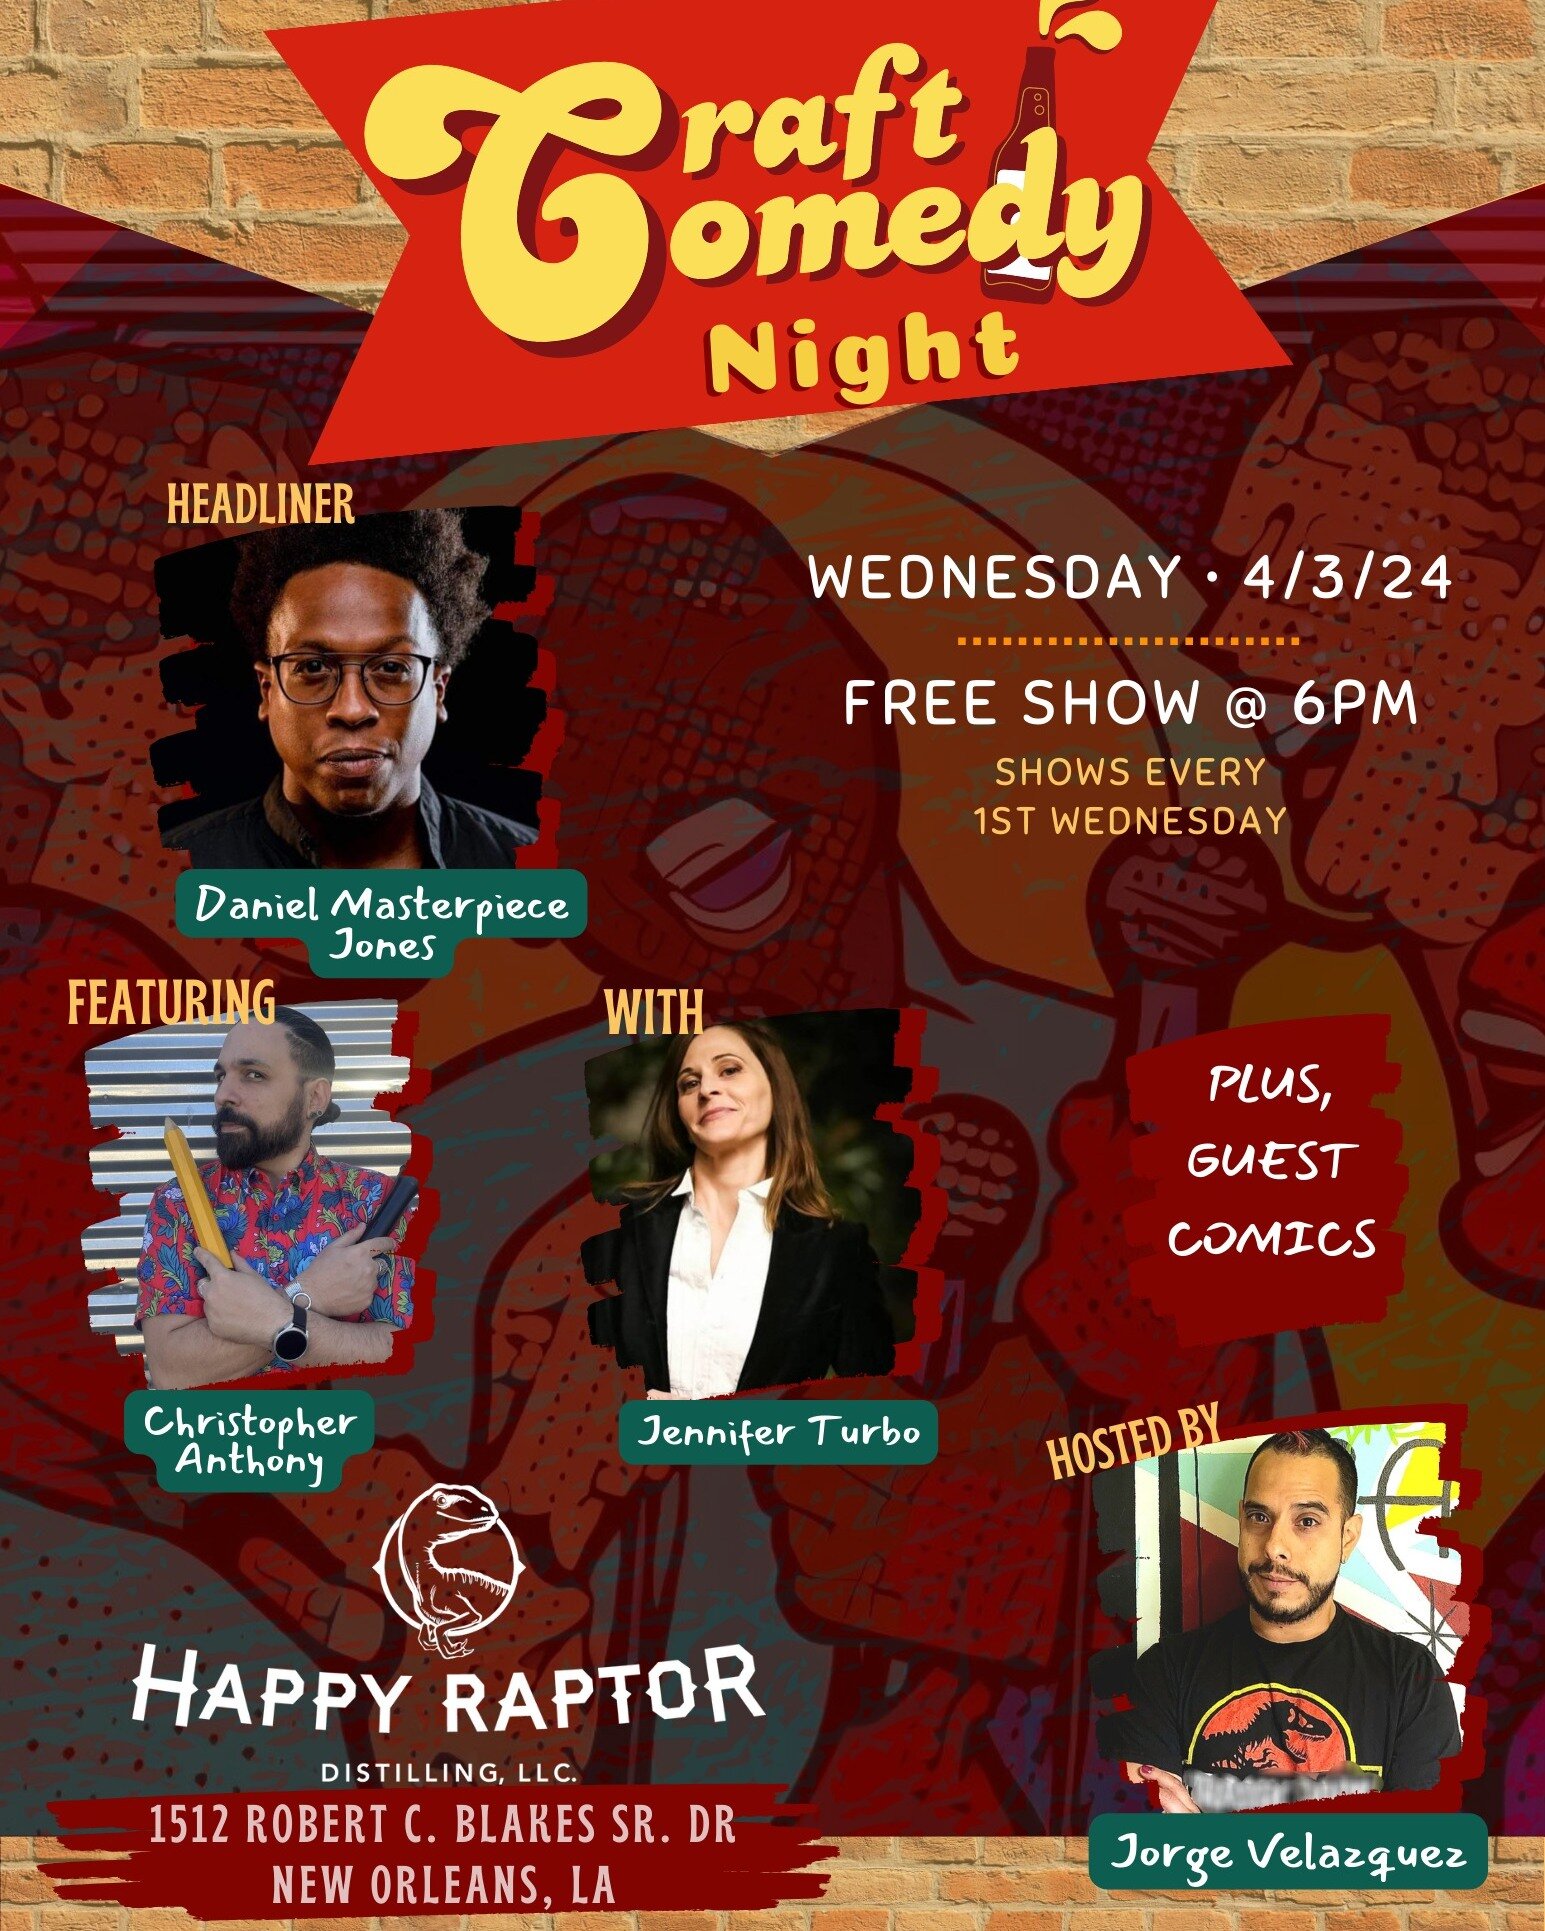 Check us out for Craft Comedy in the Tasting Room! A night full of belly laughs, good drinks and good company. What could be better?

#happyraptor #nolacomedy #wherenoladrinks #nolaevents #504rum